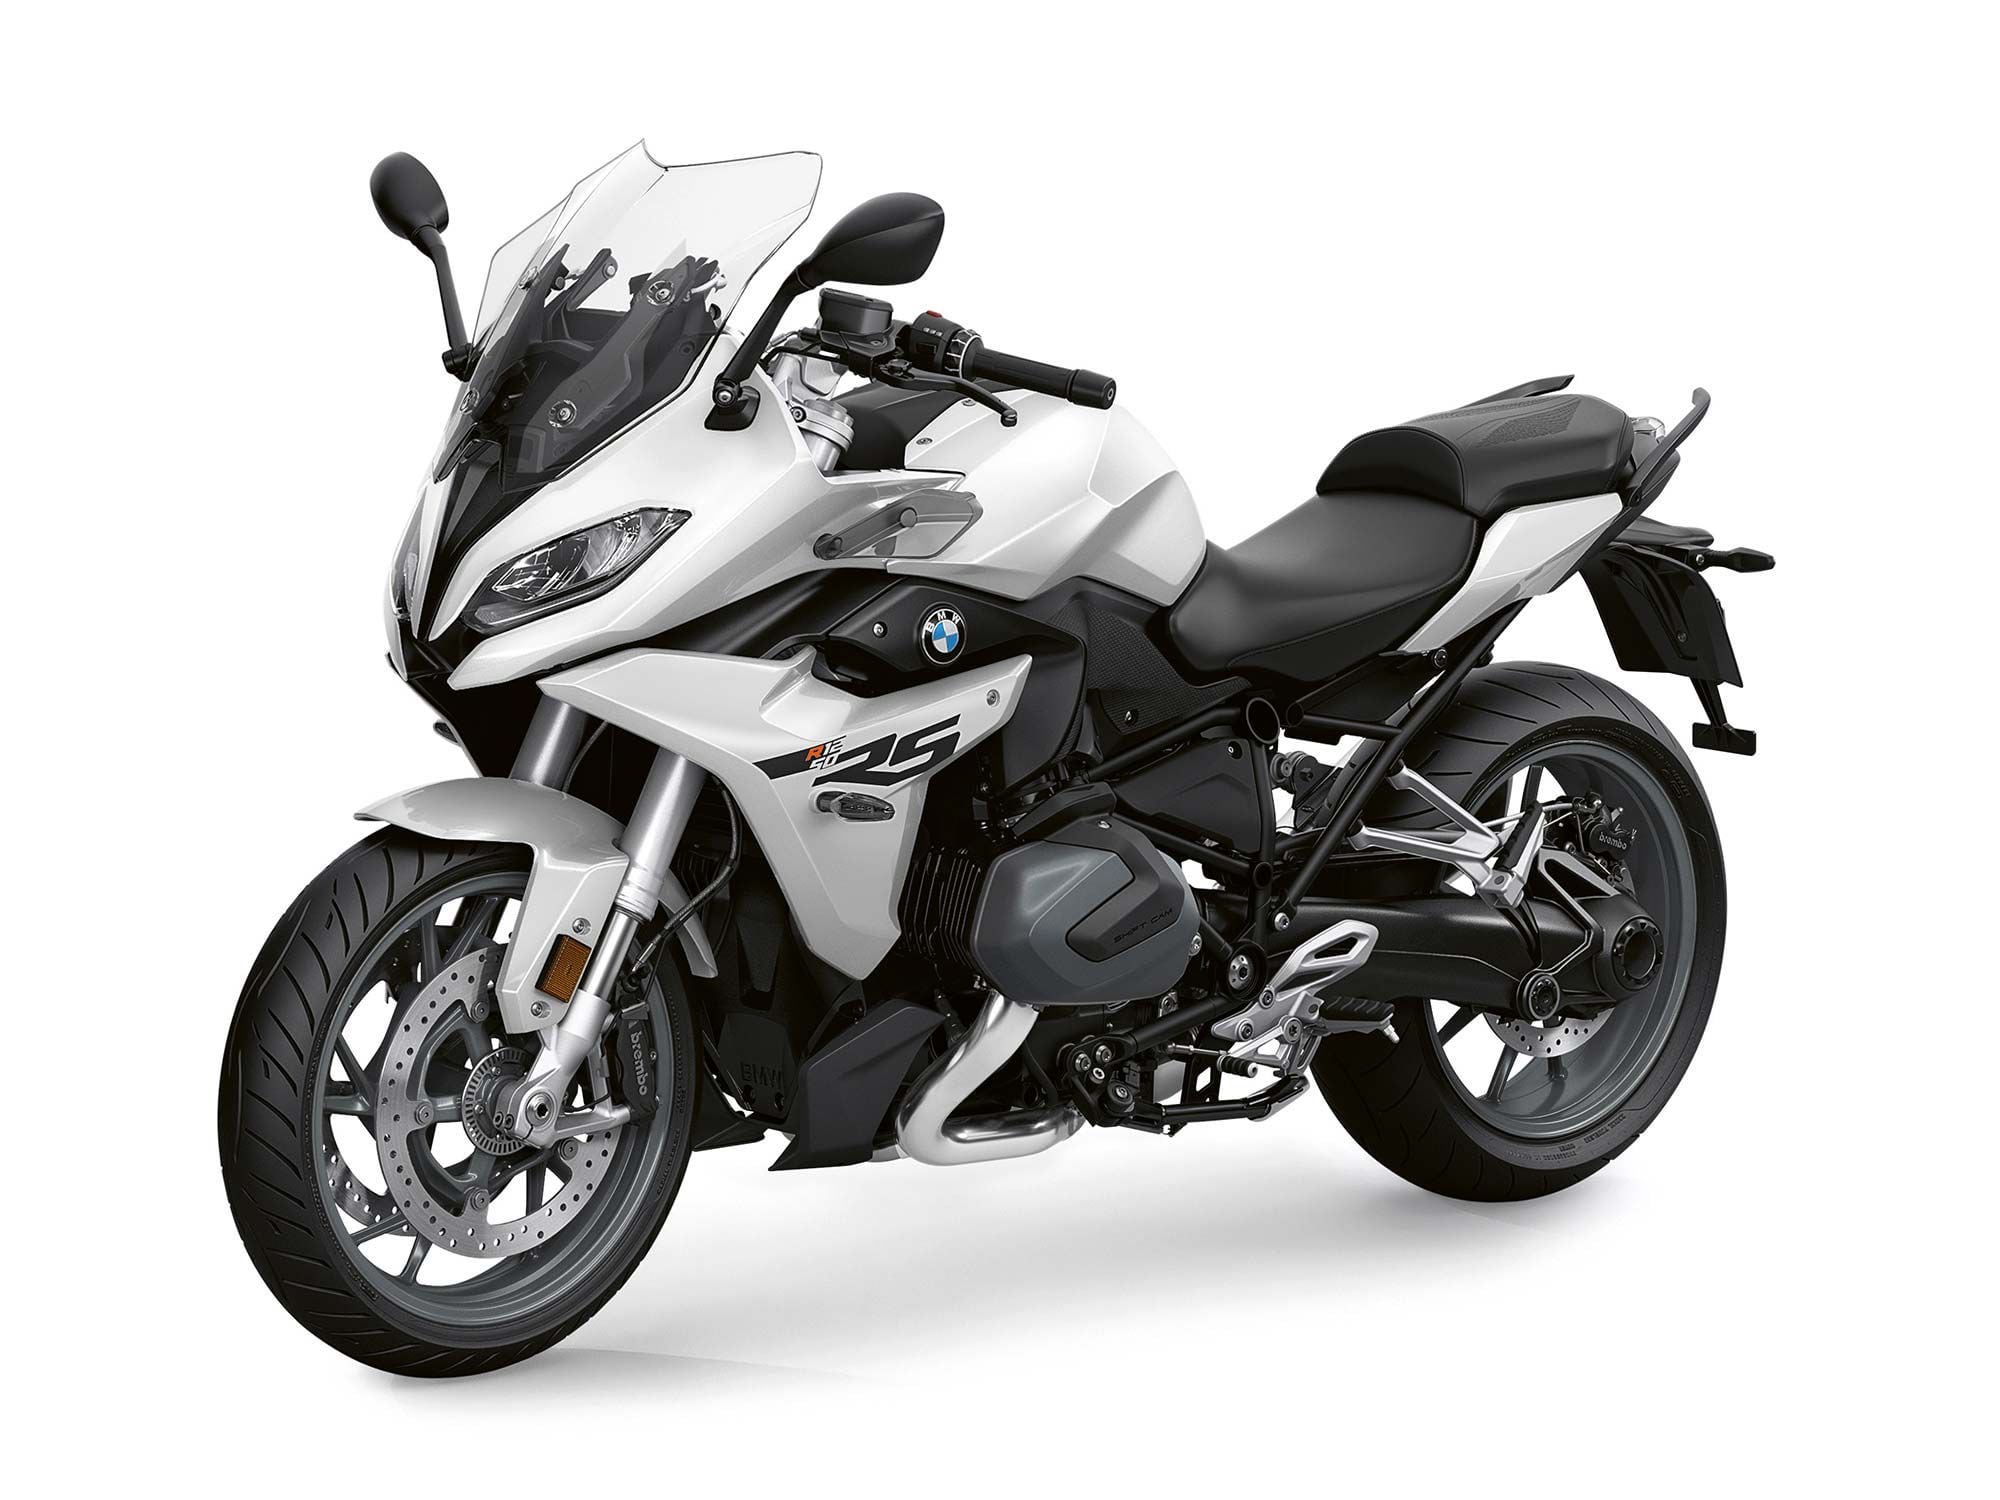 2023 BMW R 1250 RS in Light White.